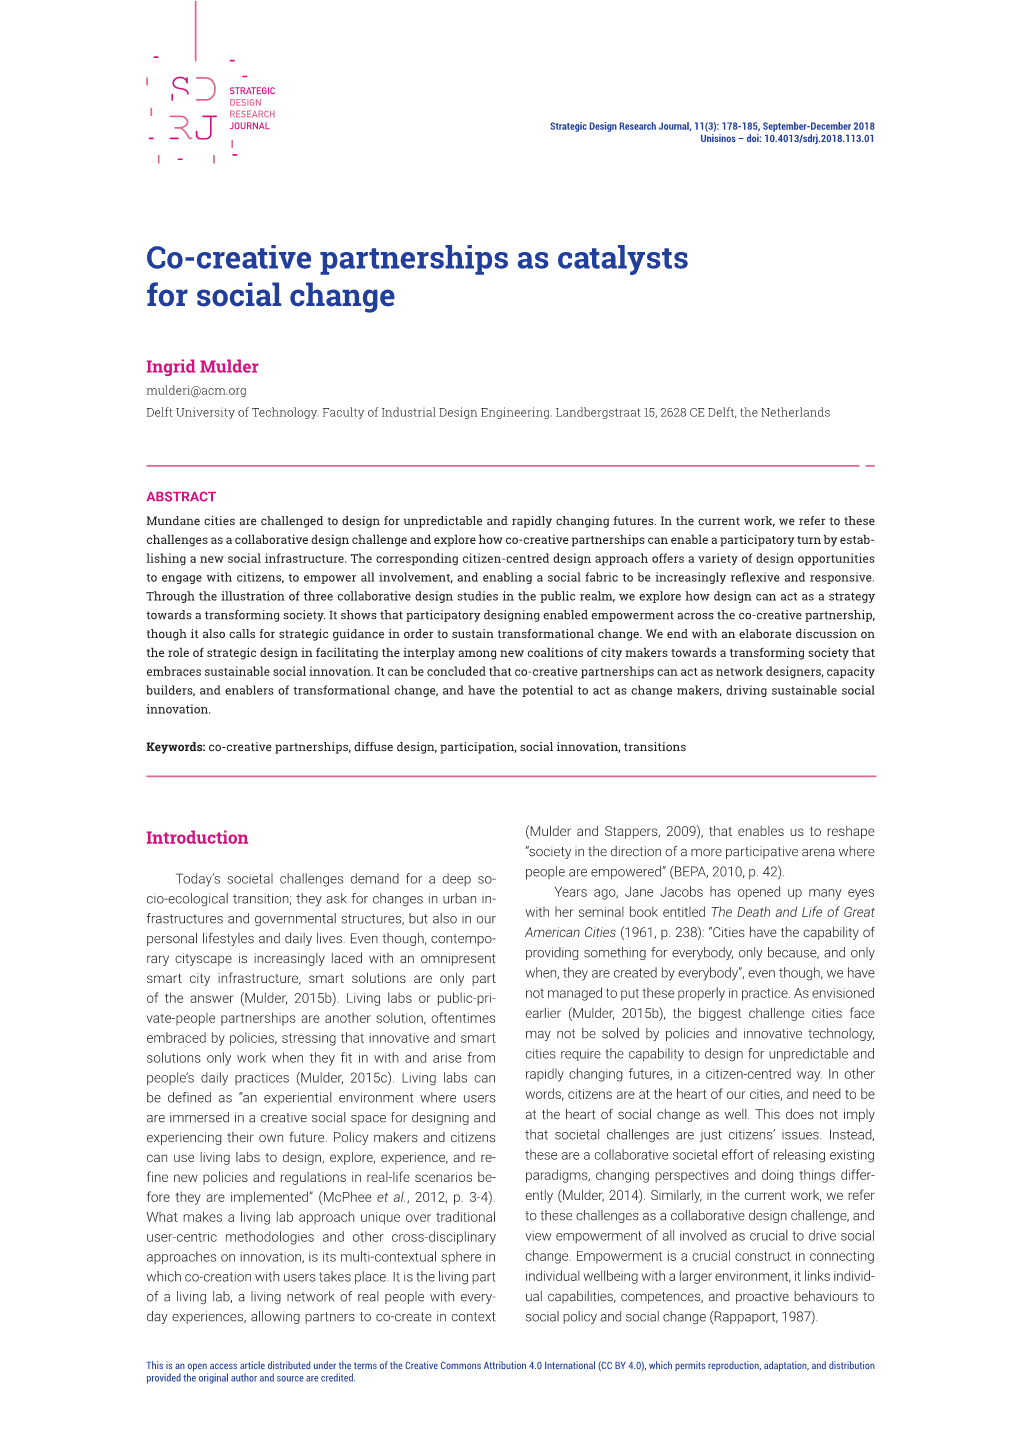 Co-Creative Partnerships As Catalysts for Social Change